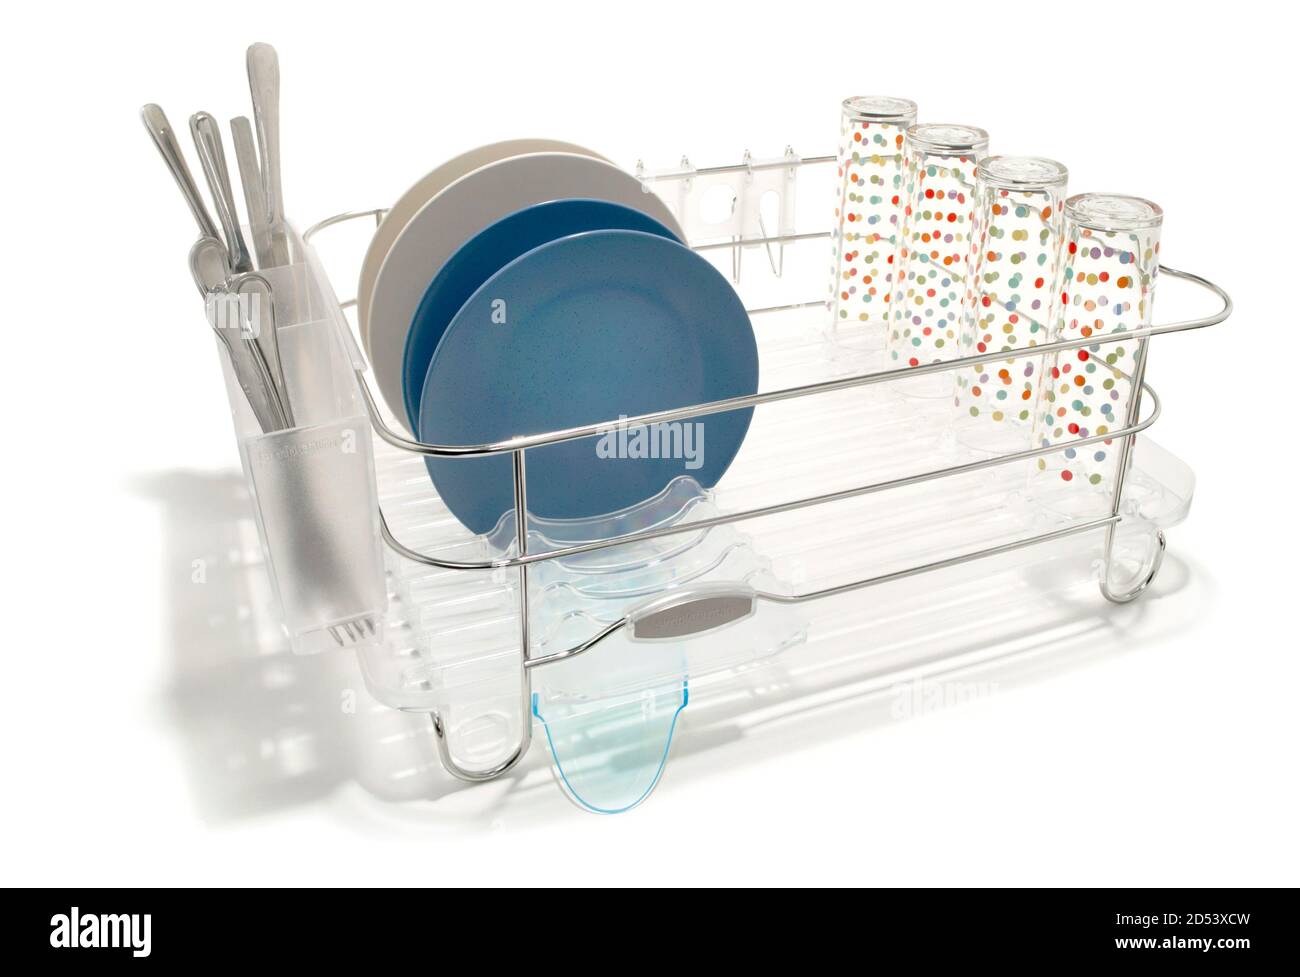 metal dish rack with plastic tray and dishes photographed on a white background Stock Photo